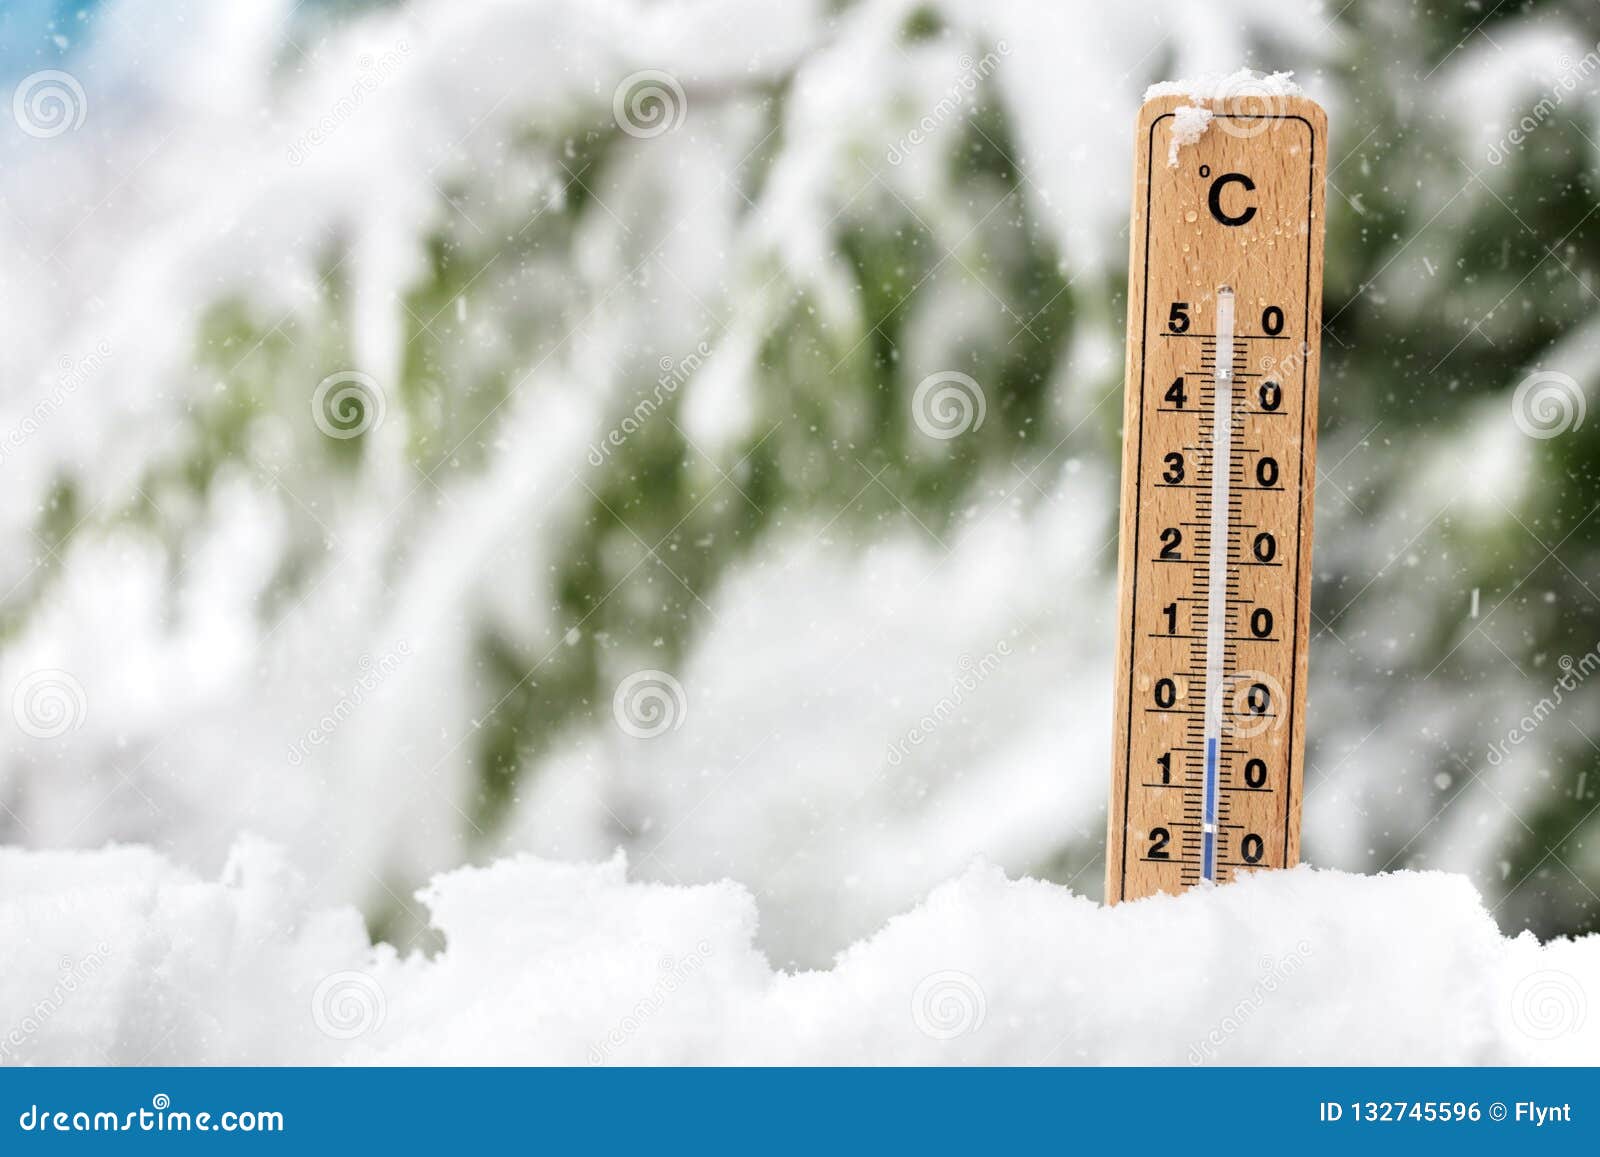 thermometer showing freezing cold temperature in the snow